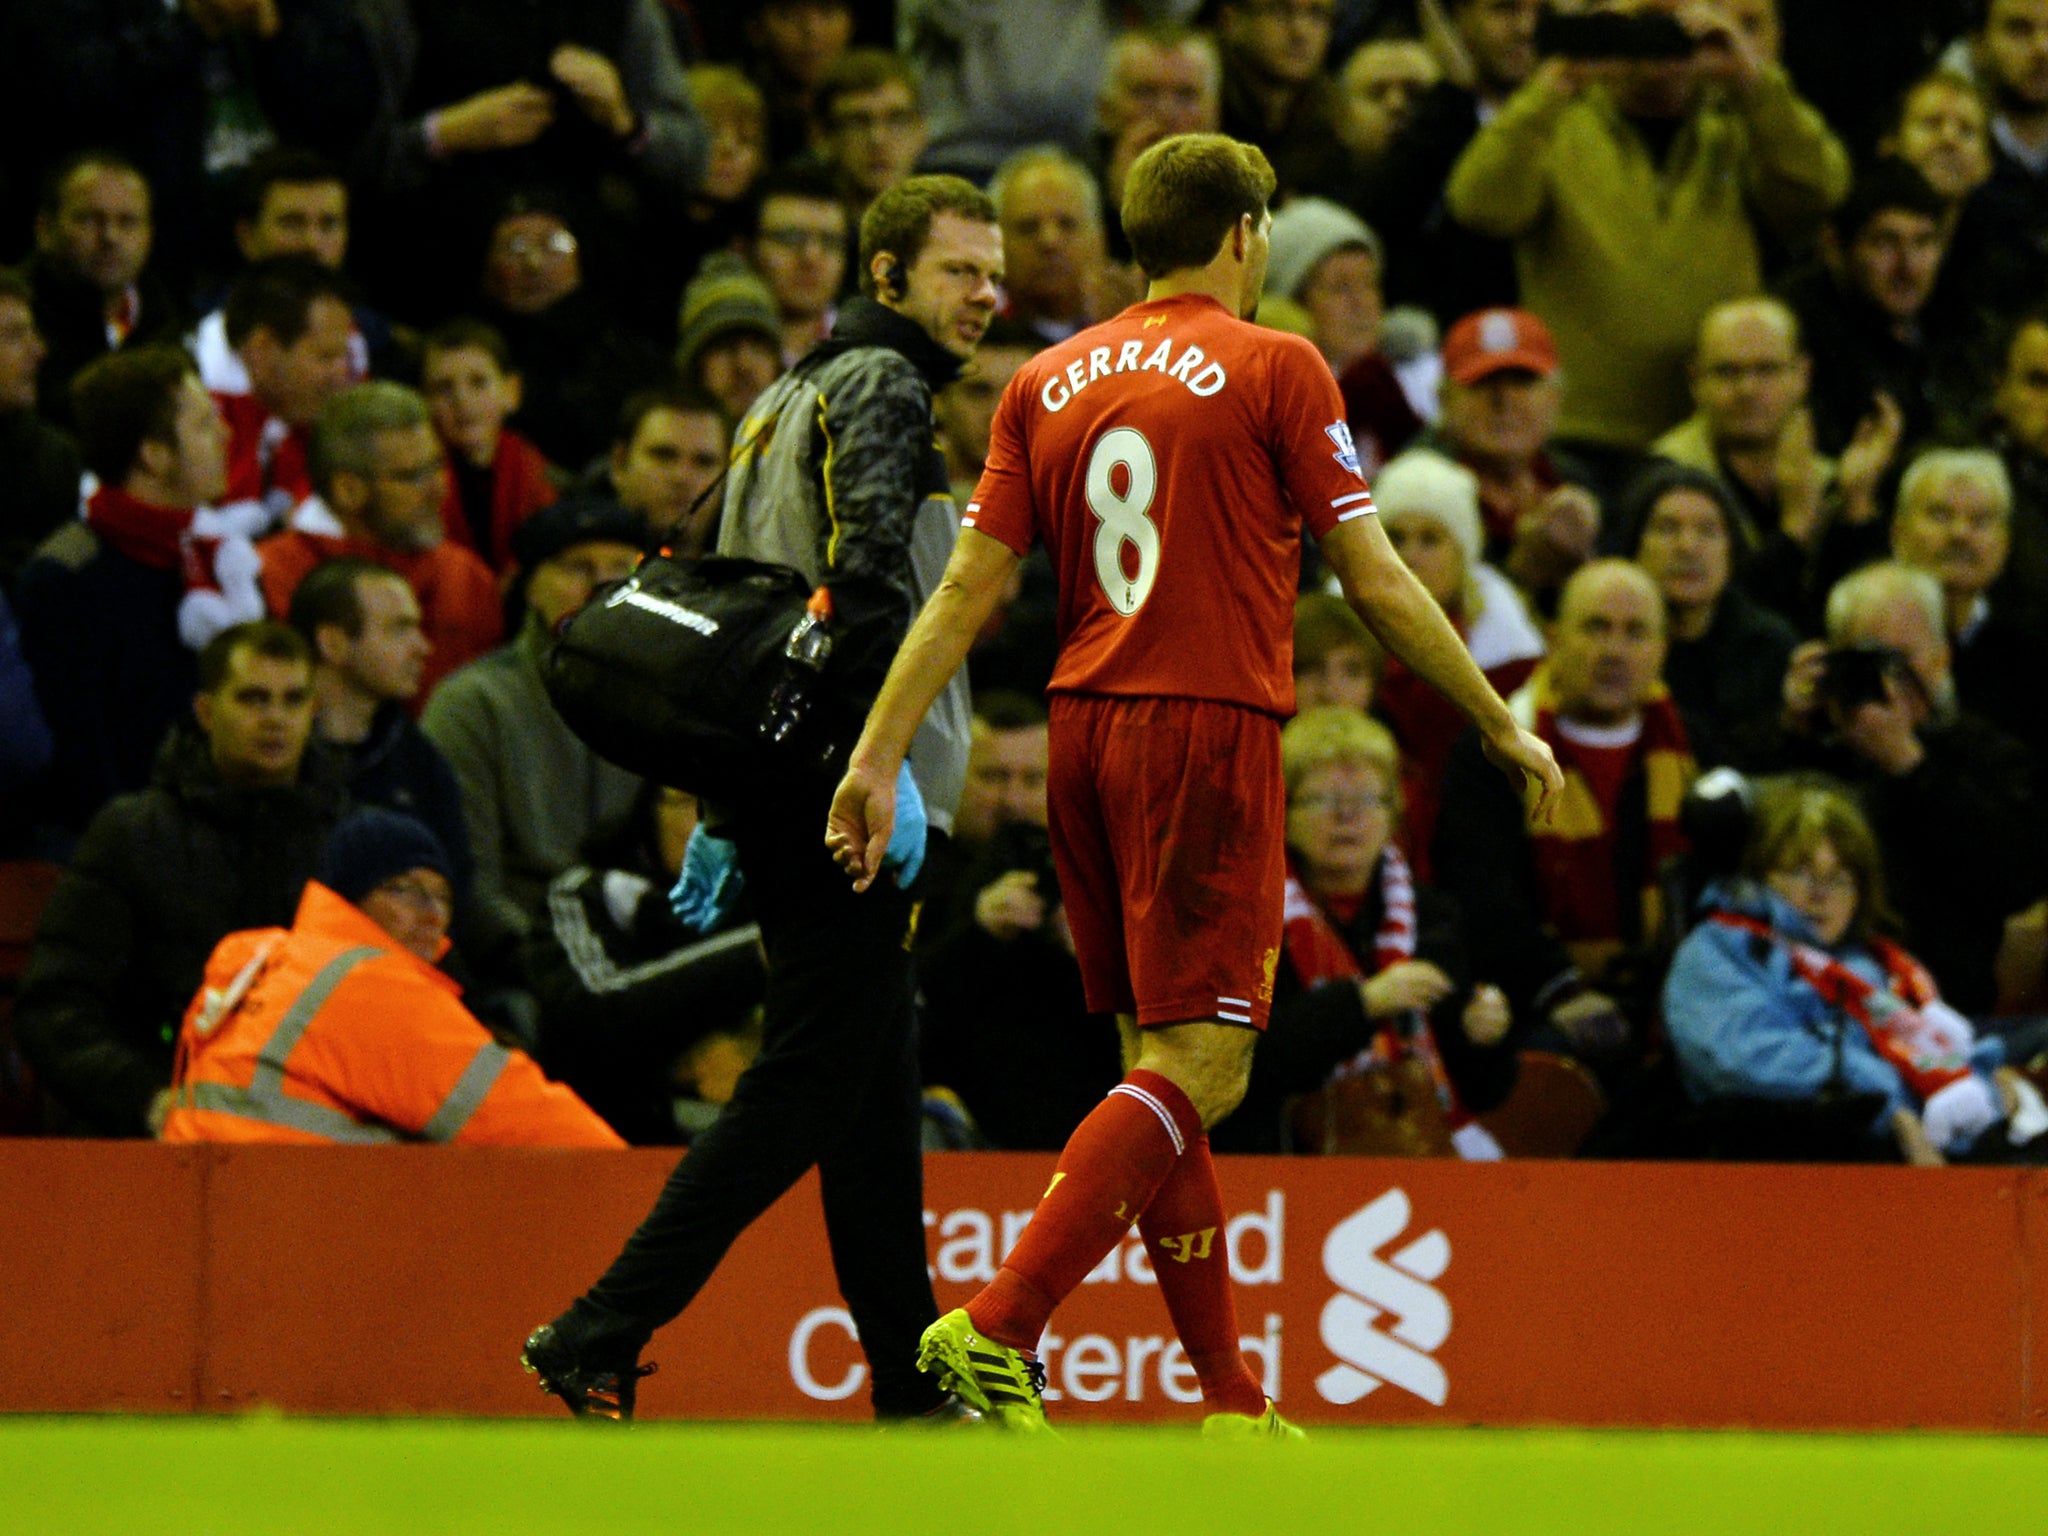 Liverpool captain Steven Gerrard limps off during the 4-1 victory over West Ham